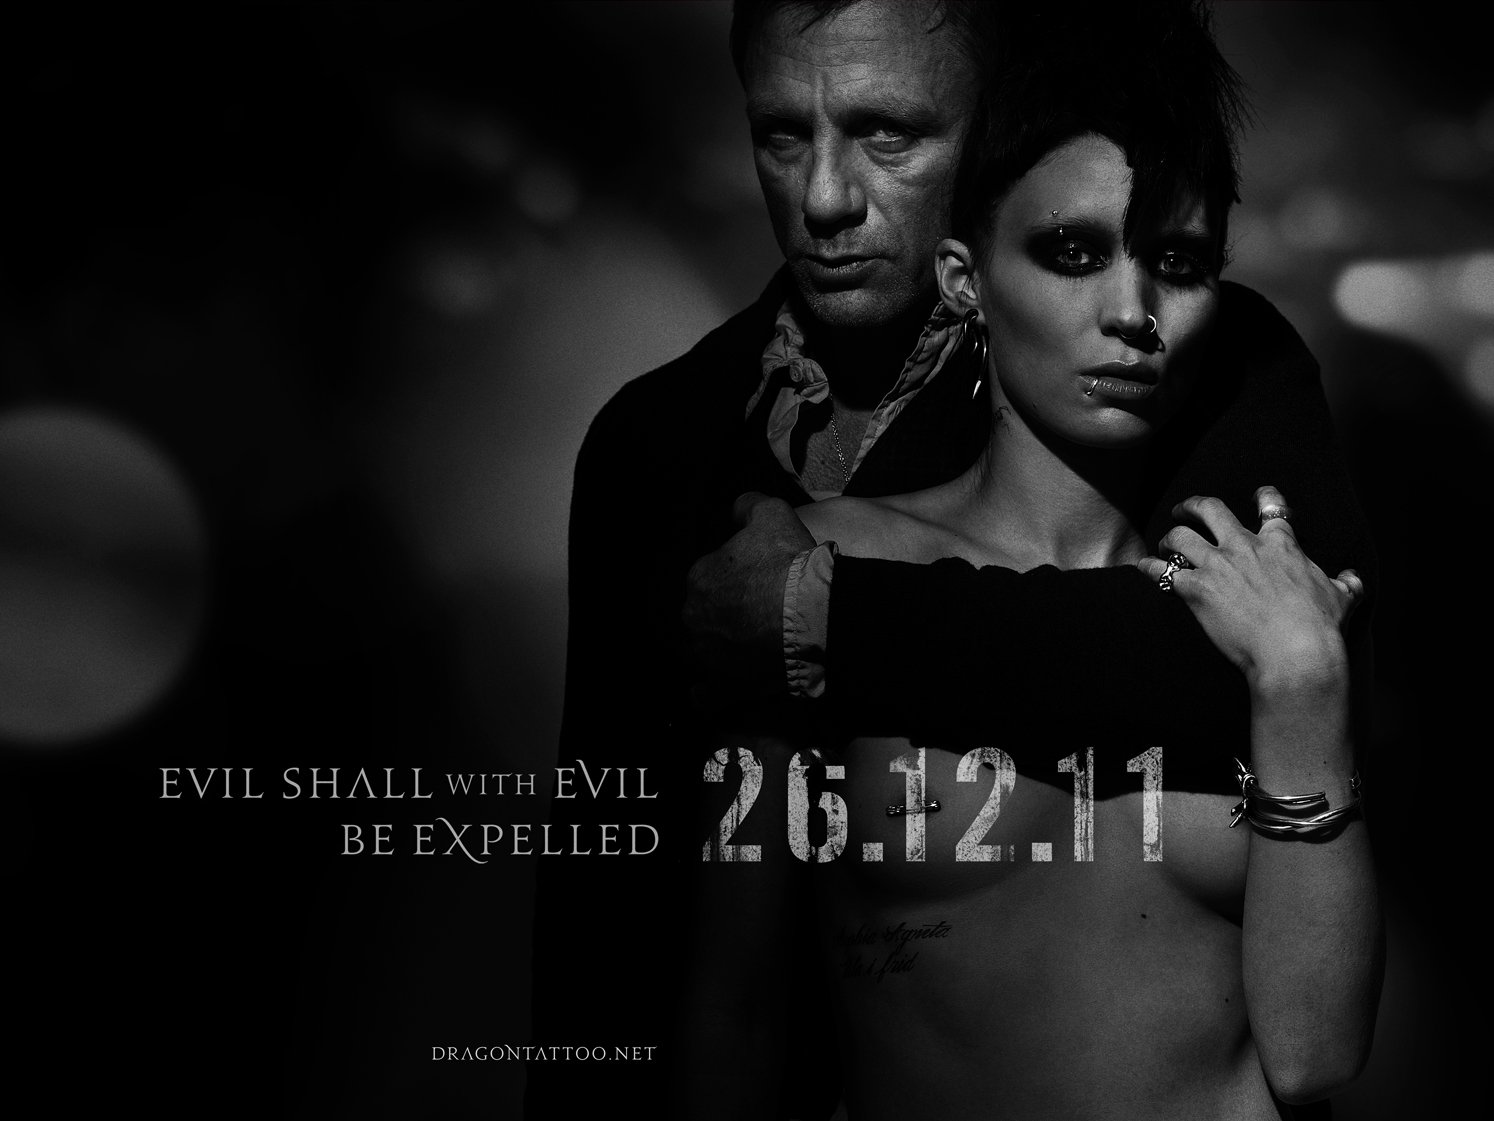 The Girl With The Dragon Tattoo Movie Trailer 2011